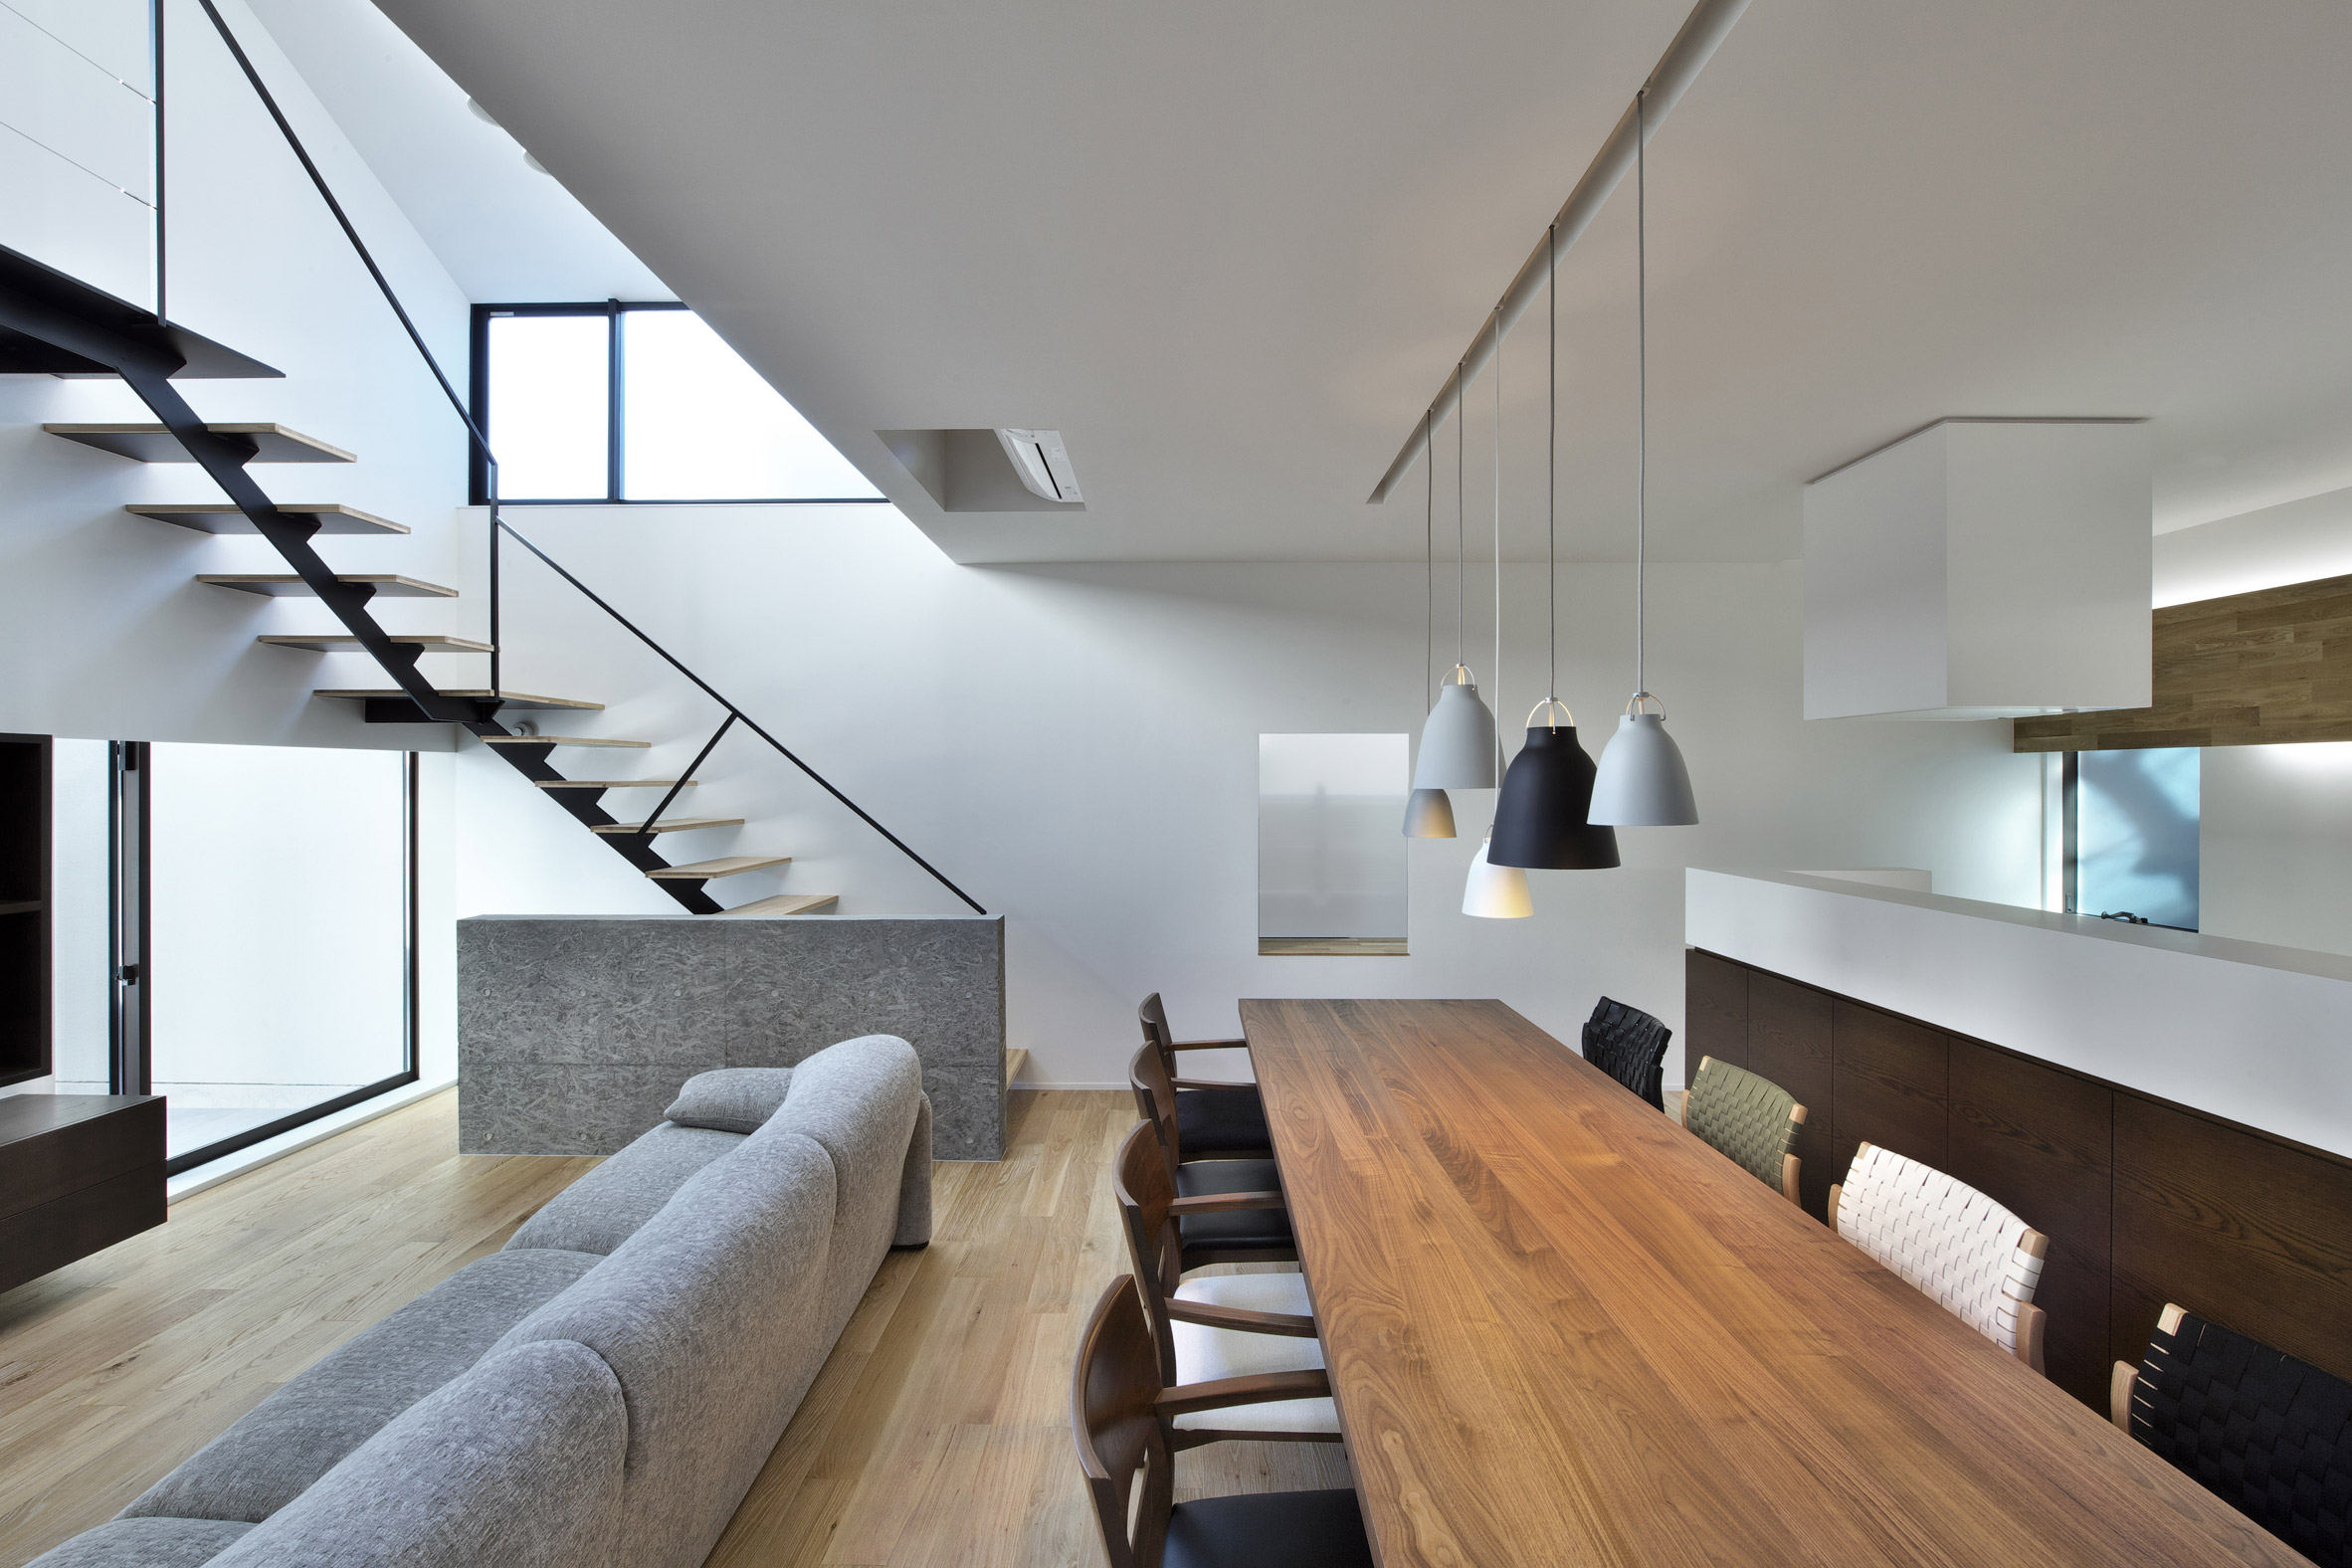 house-of-fluctuations-satoru-hirota-architects-architecture-tokyo-japan-residential_dezeen_2364_col_24